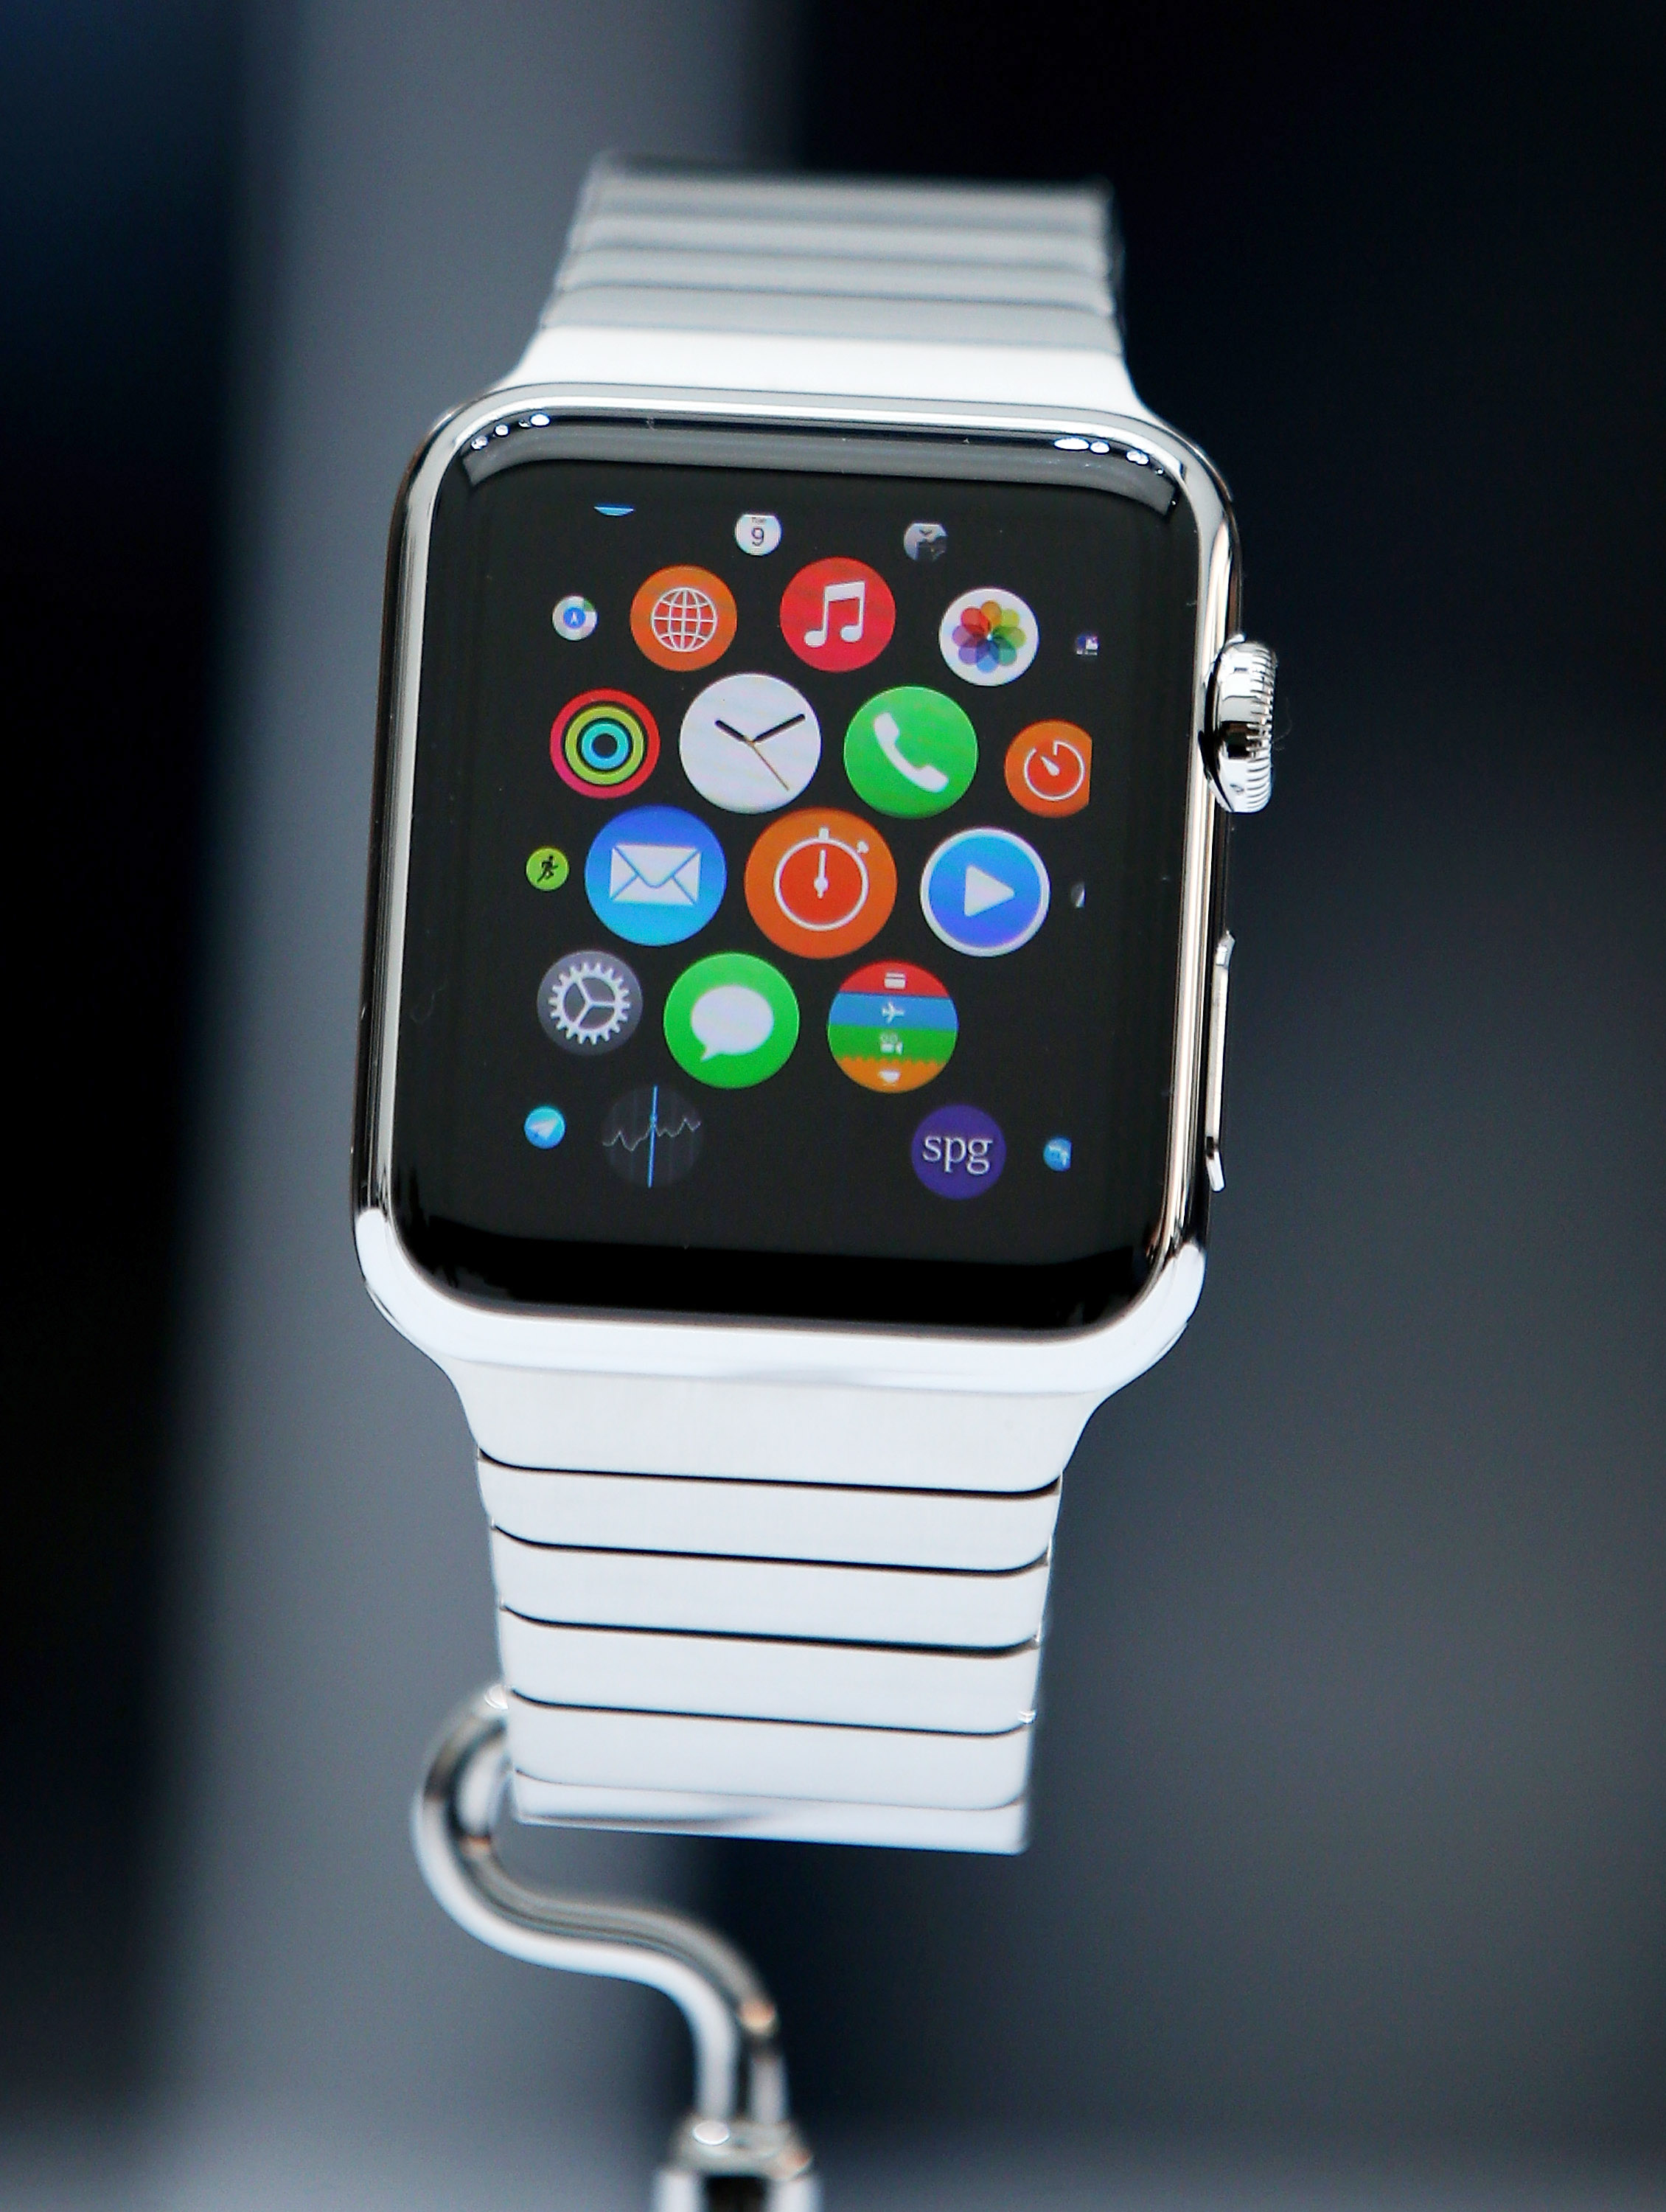 The new Apple Watch is displayed during an Apple special event at the Flint Center for the Performing Arts on Sept. 9, 2014 in Cupertino, Calif. (Justin Sullivan&mdash;Getty Images)